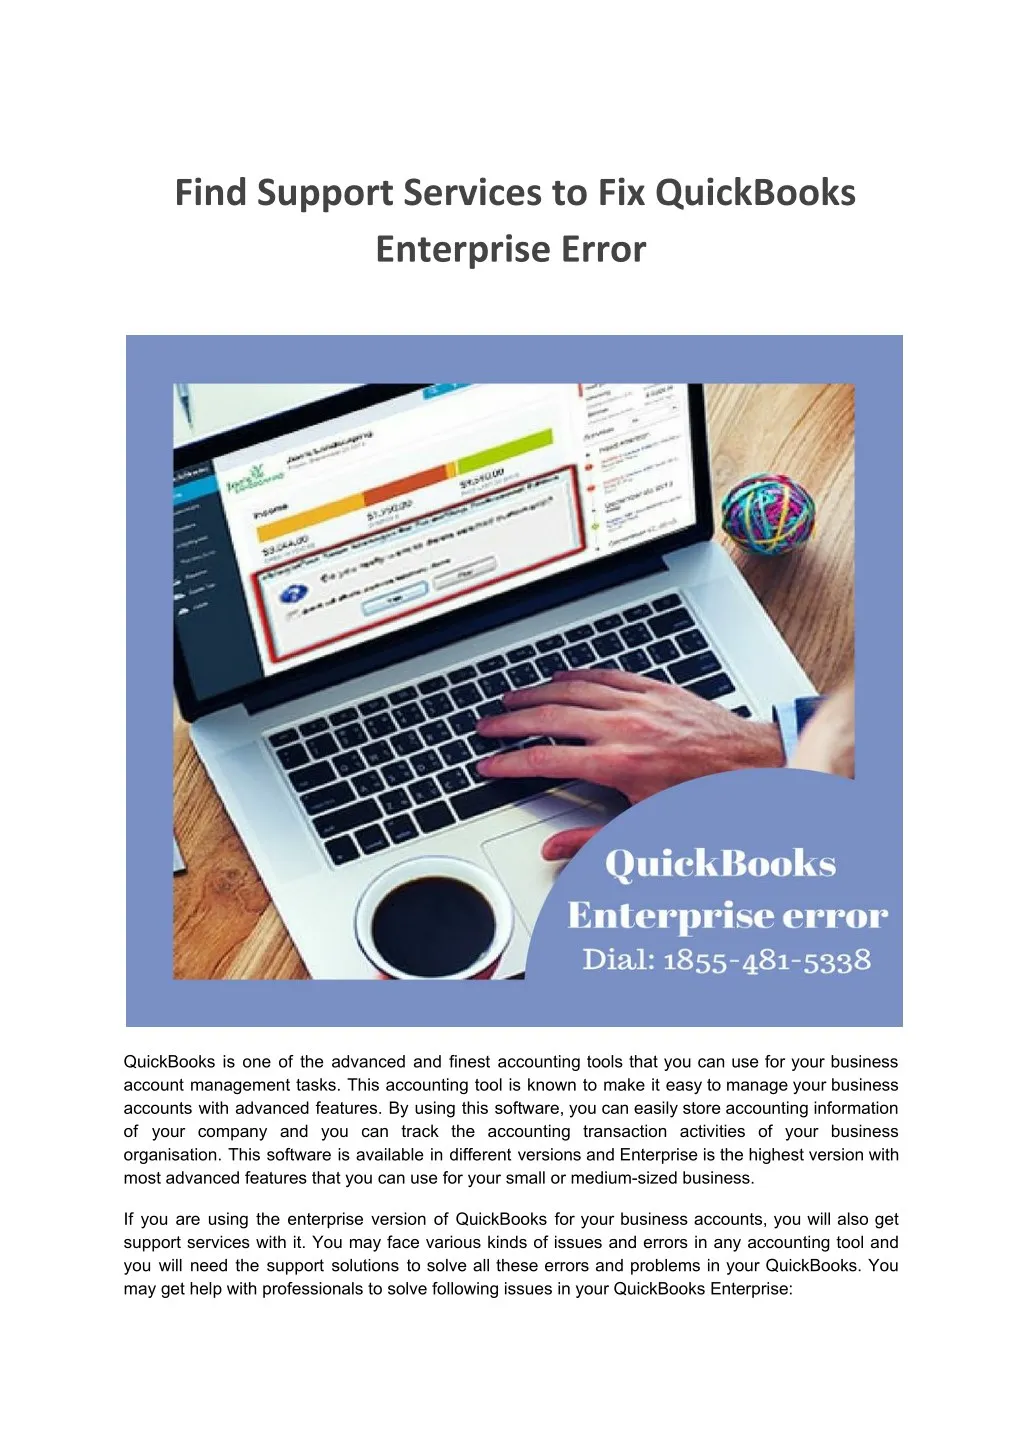 find support services to fix quickbooks